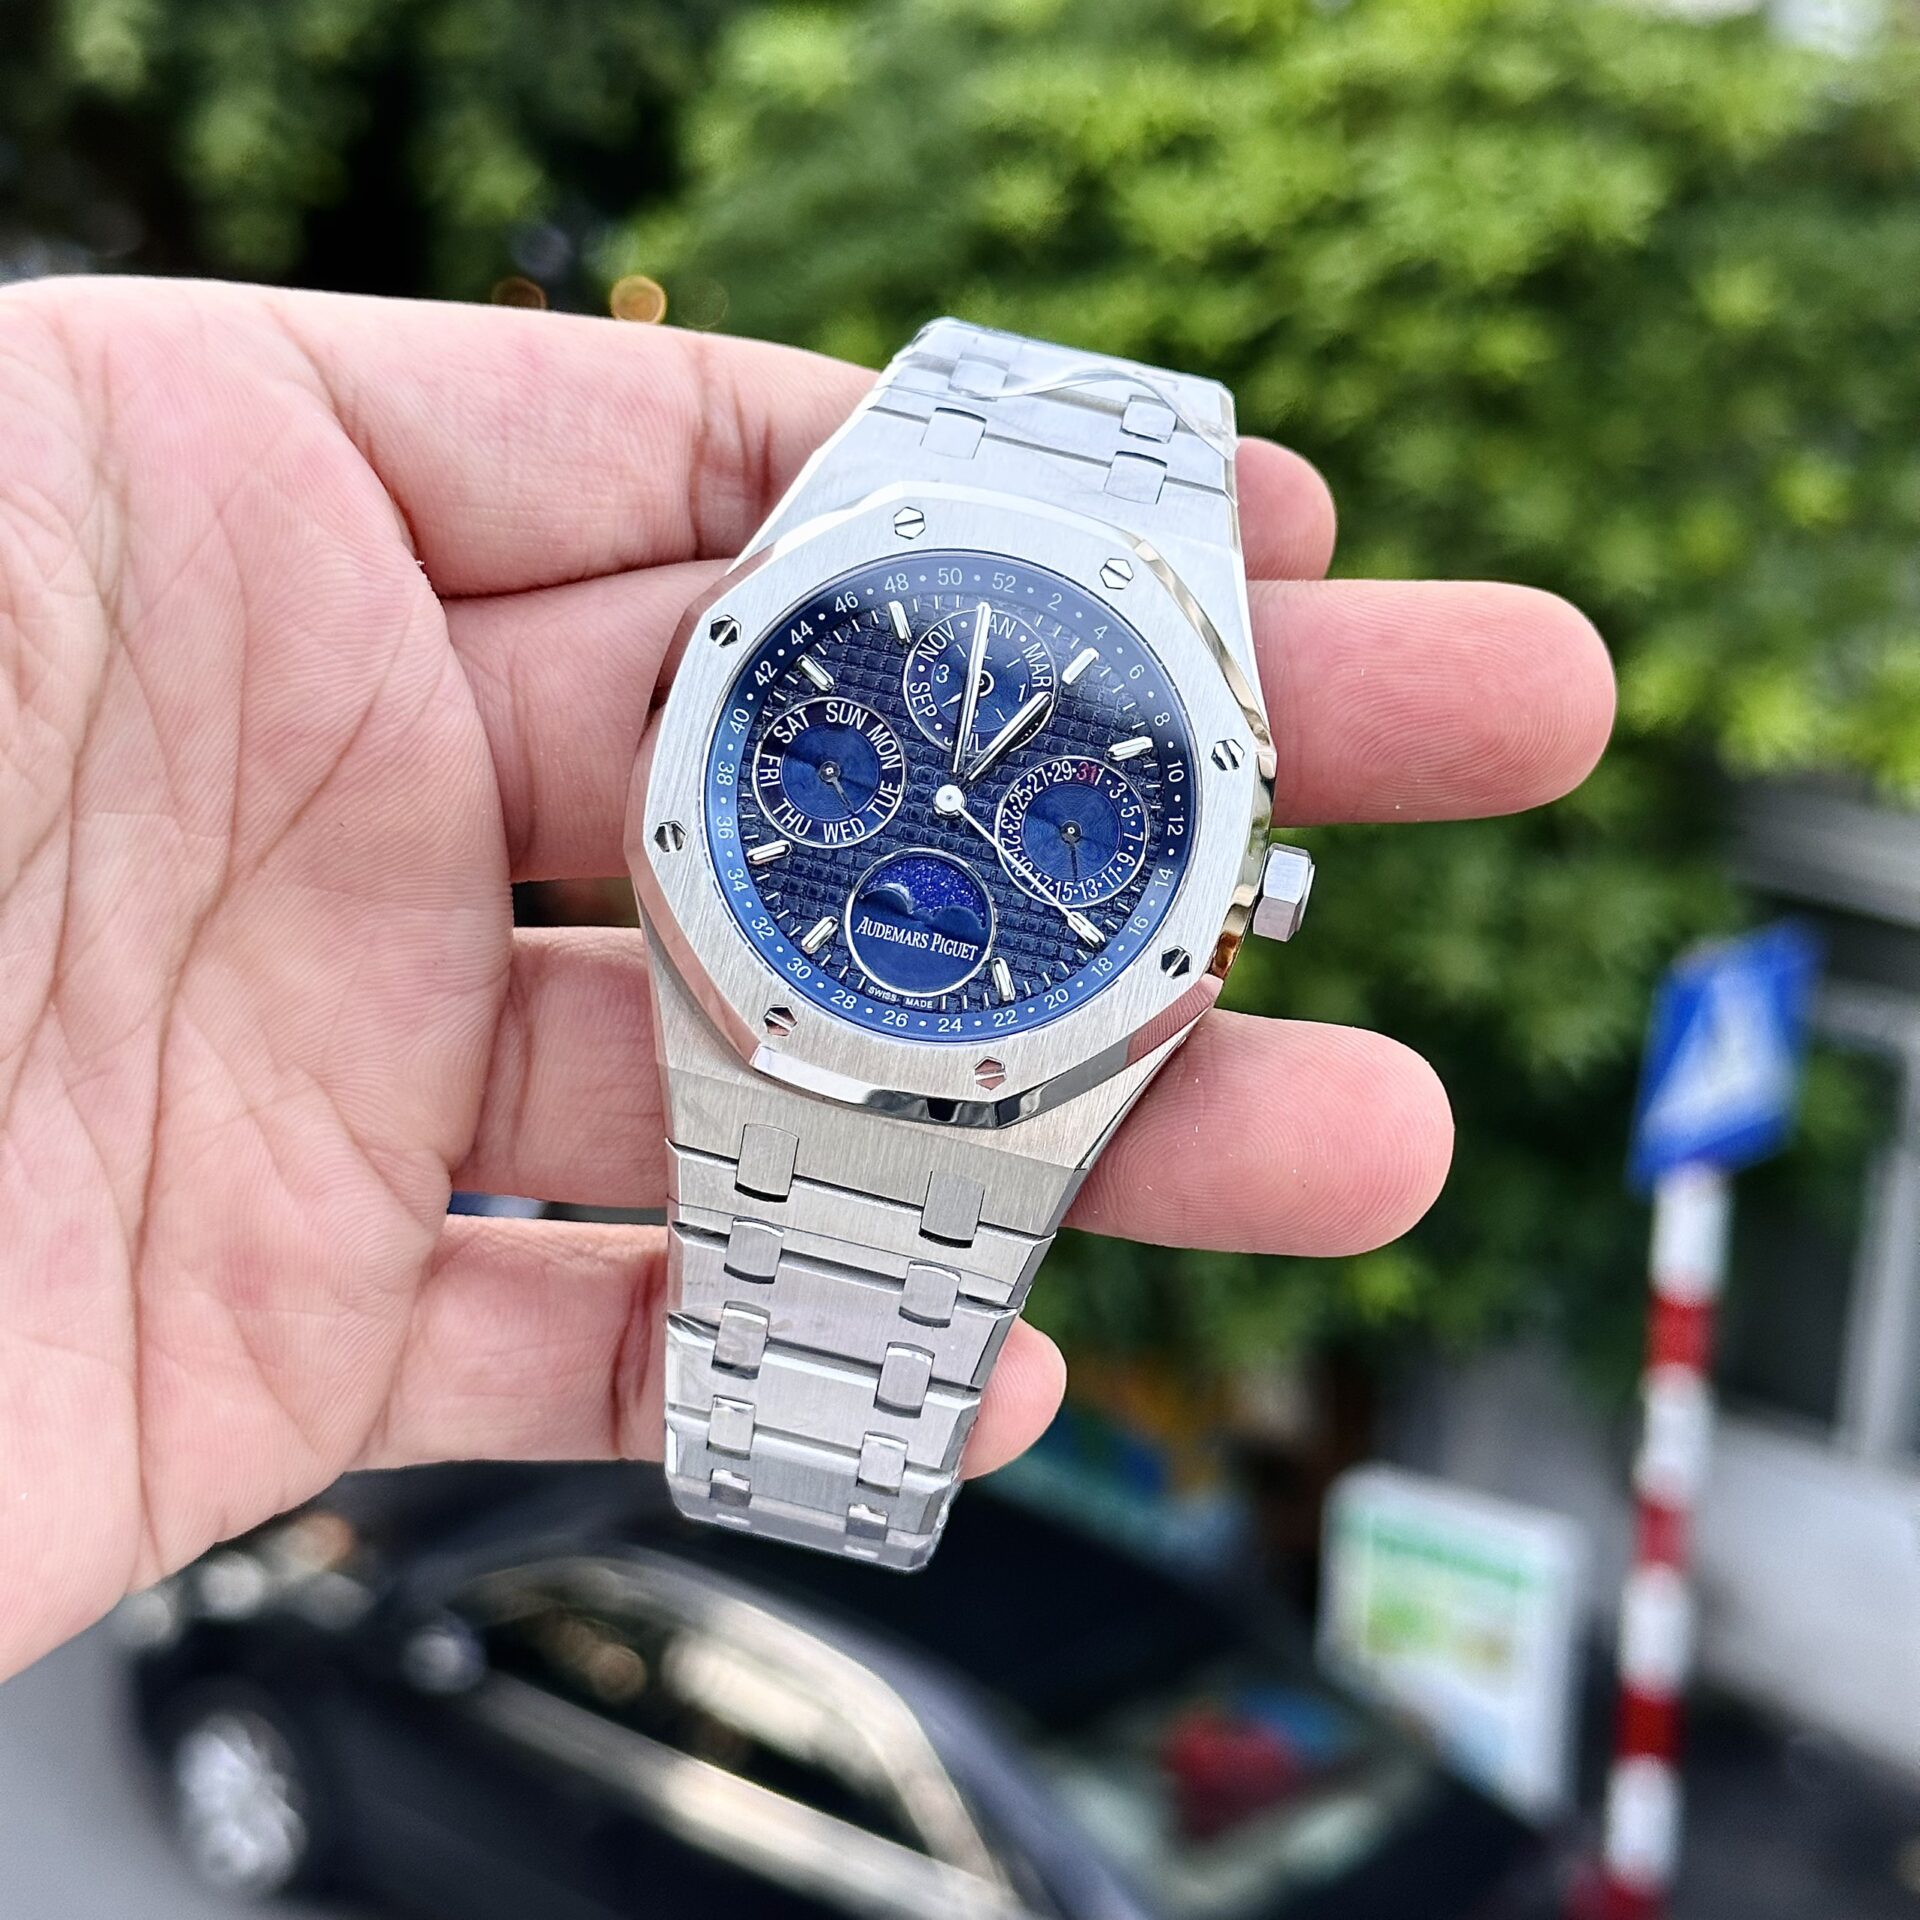 Is the Fake Audemars Piguet watch any good Top 4 reasons to use an AP replica watch